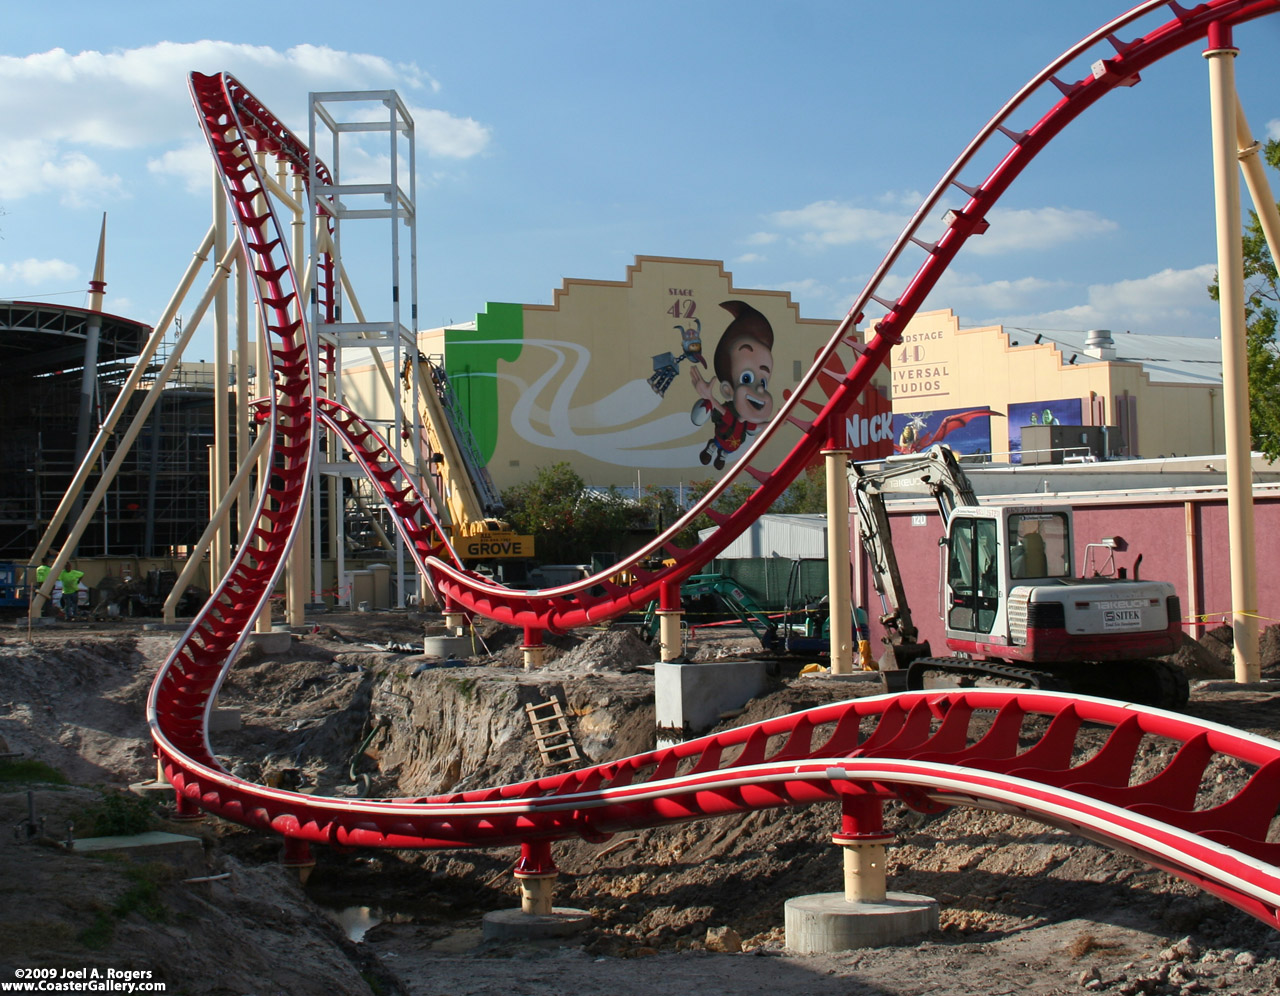 Building a theme park ride in Florida